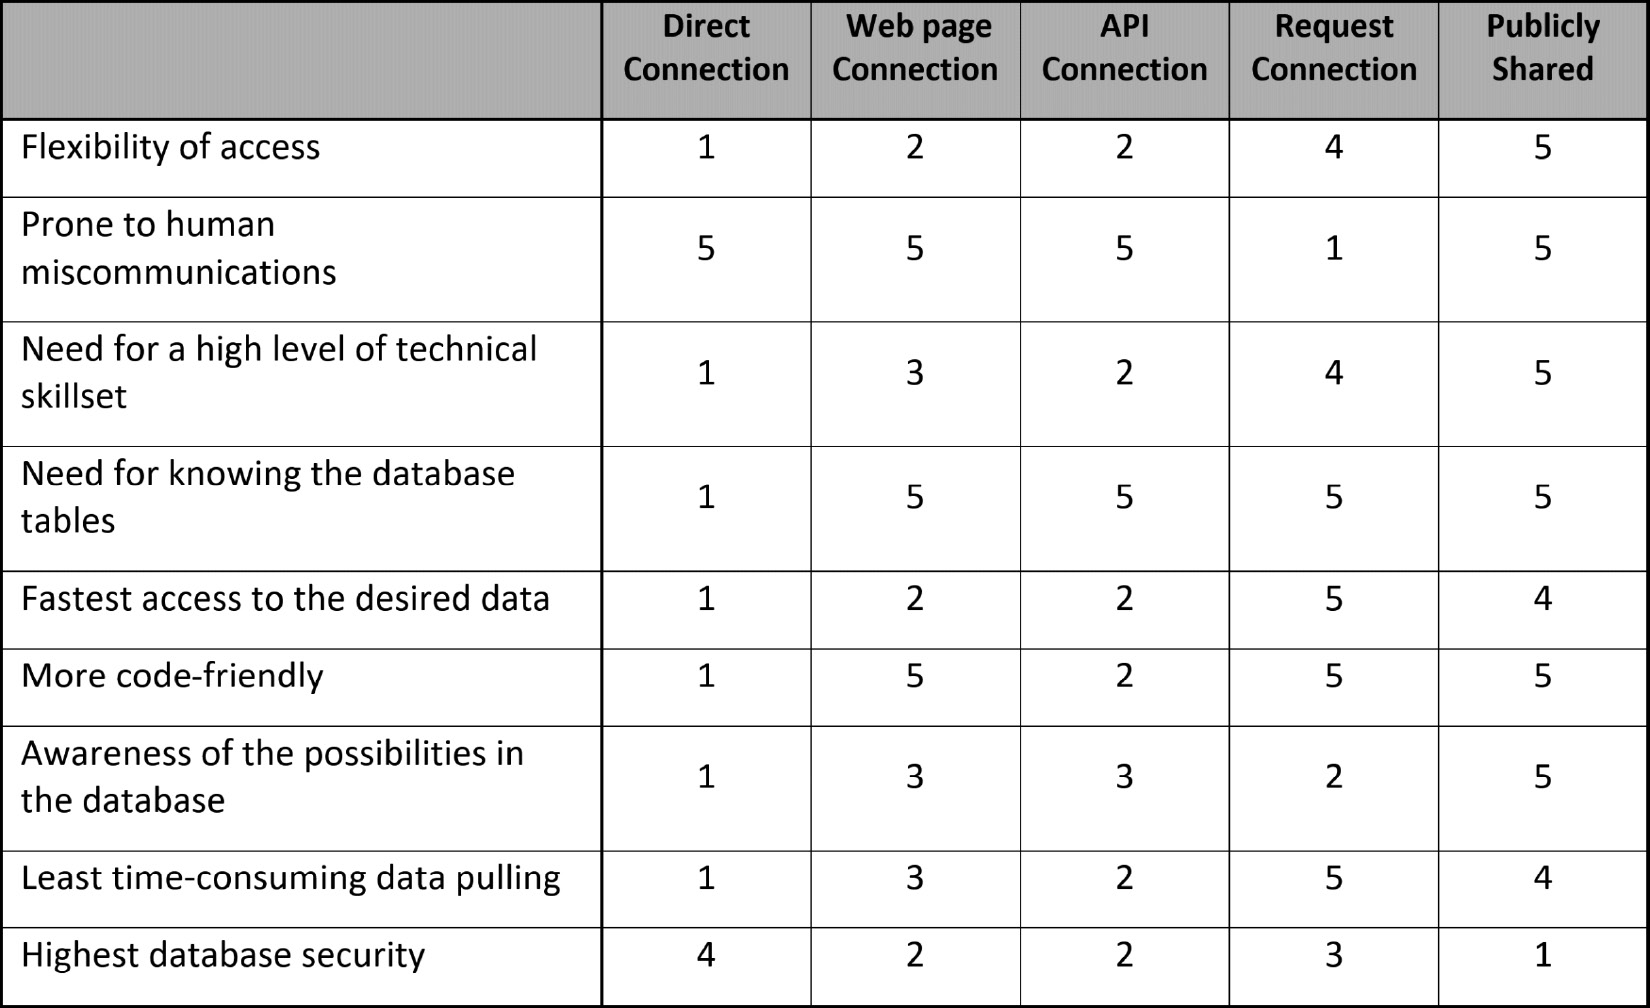 Figure 4.9 – Ranking of database connection methods
